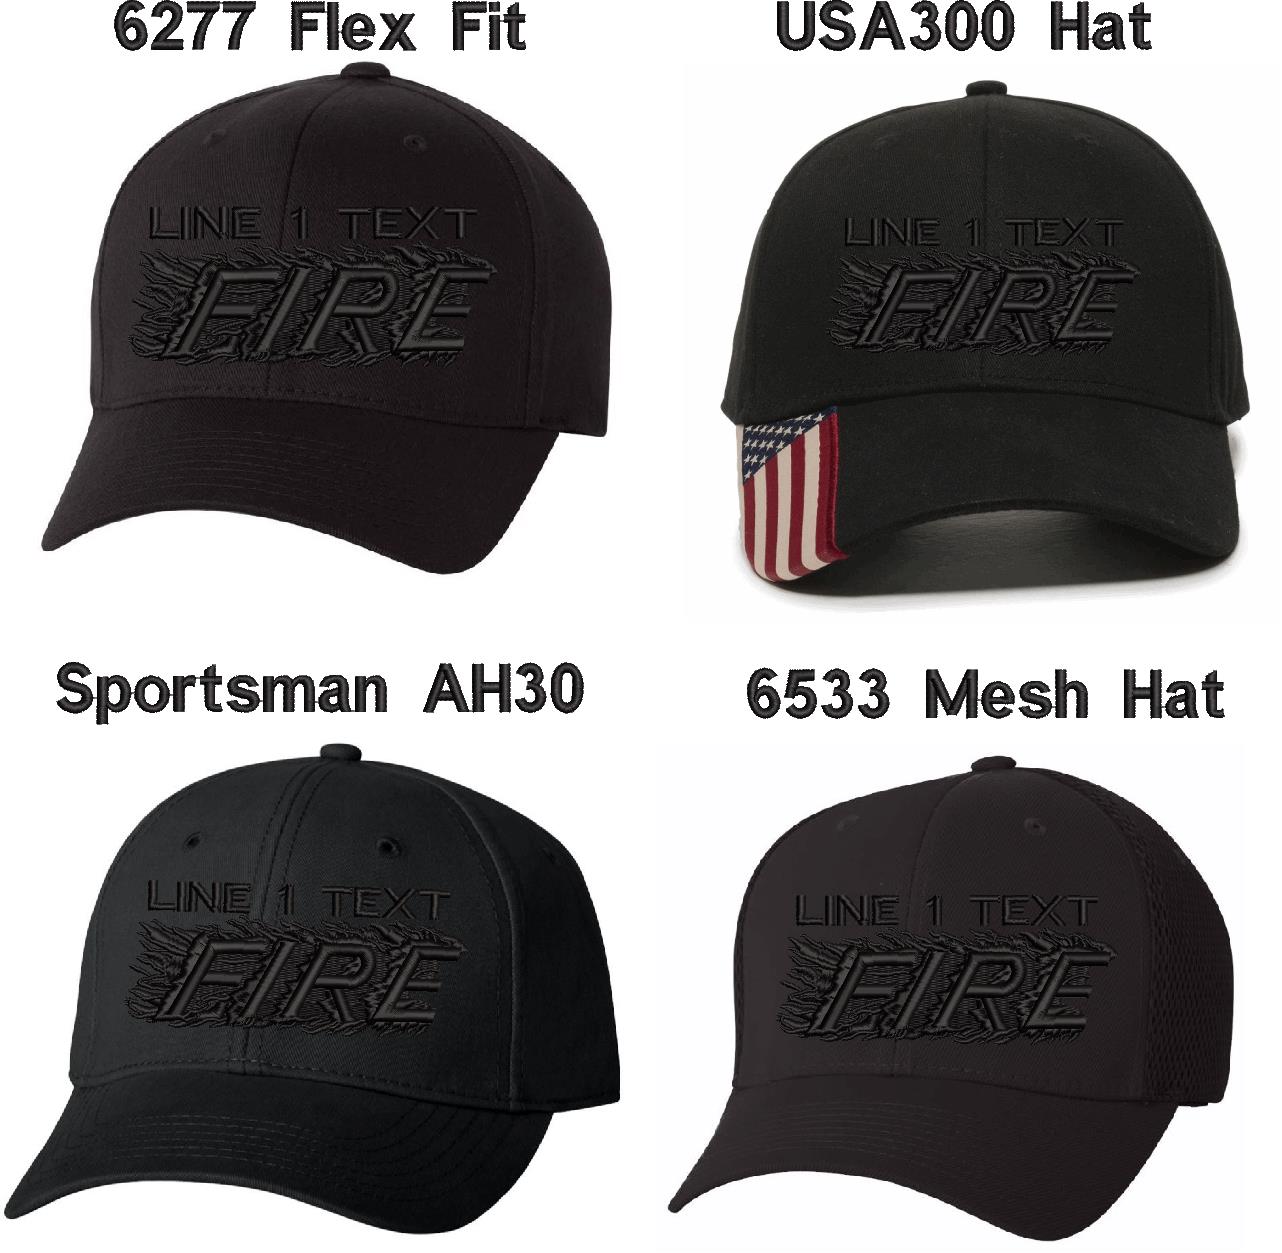 NY FIRE Style BLACKOUT Embroidered Hat - Powercall Sirens LLC